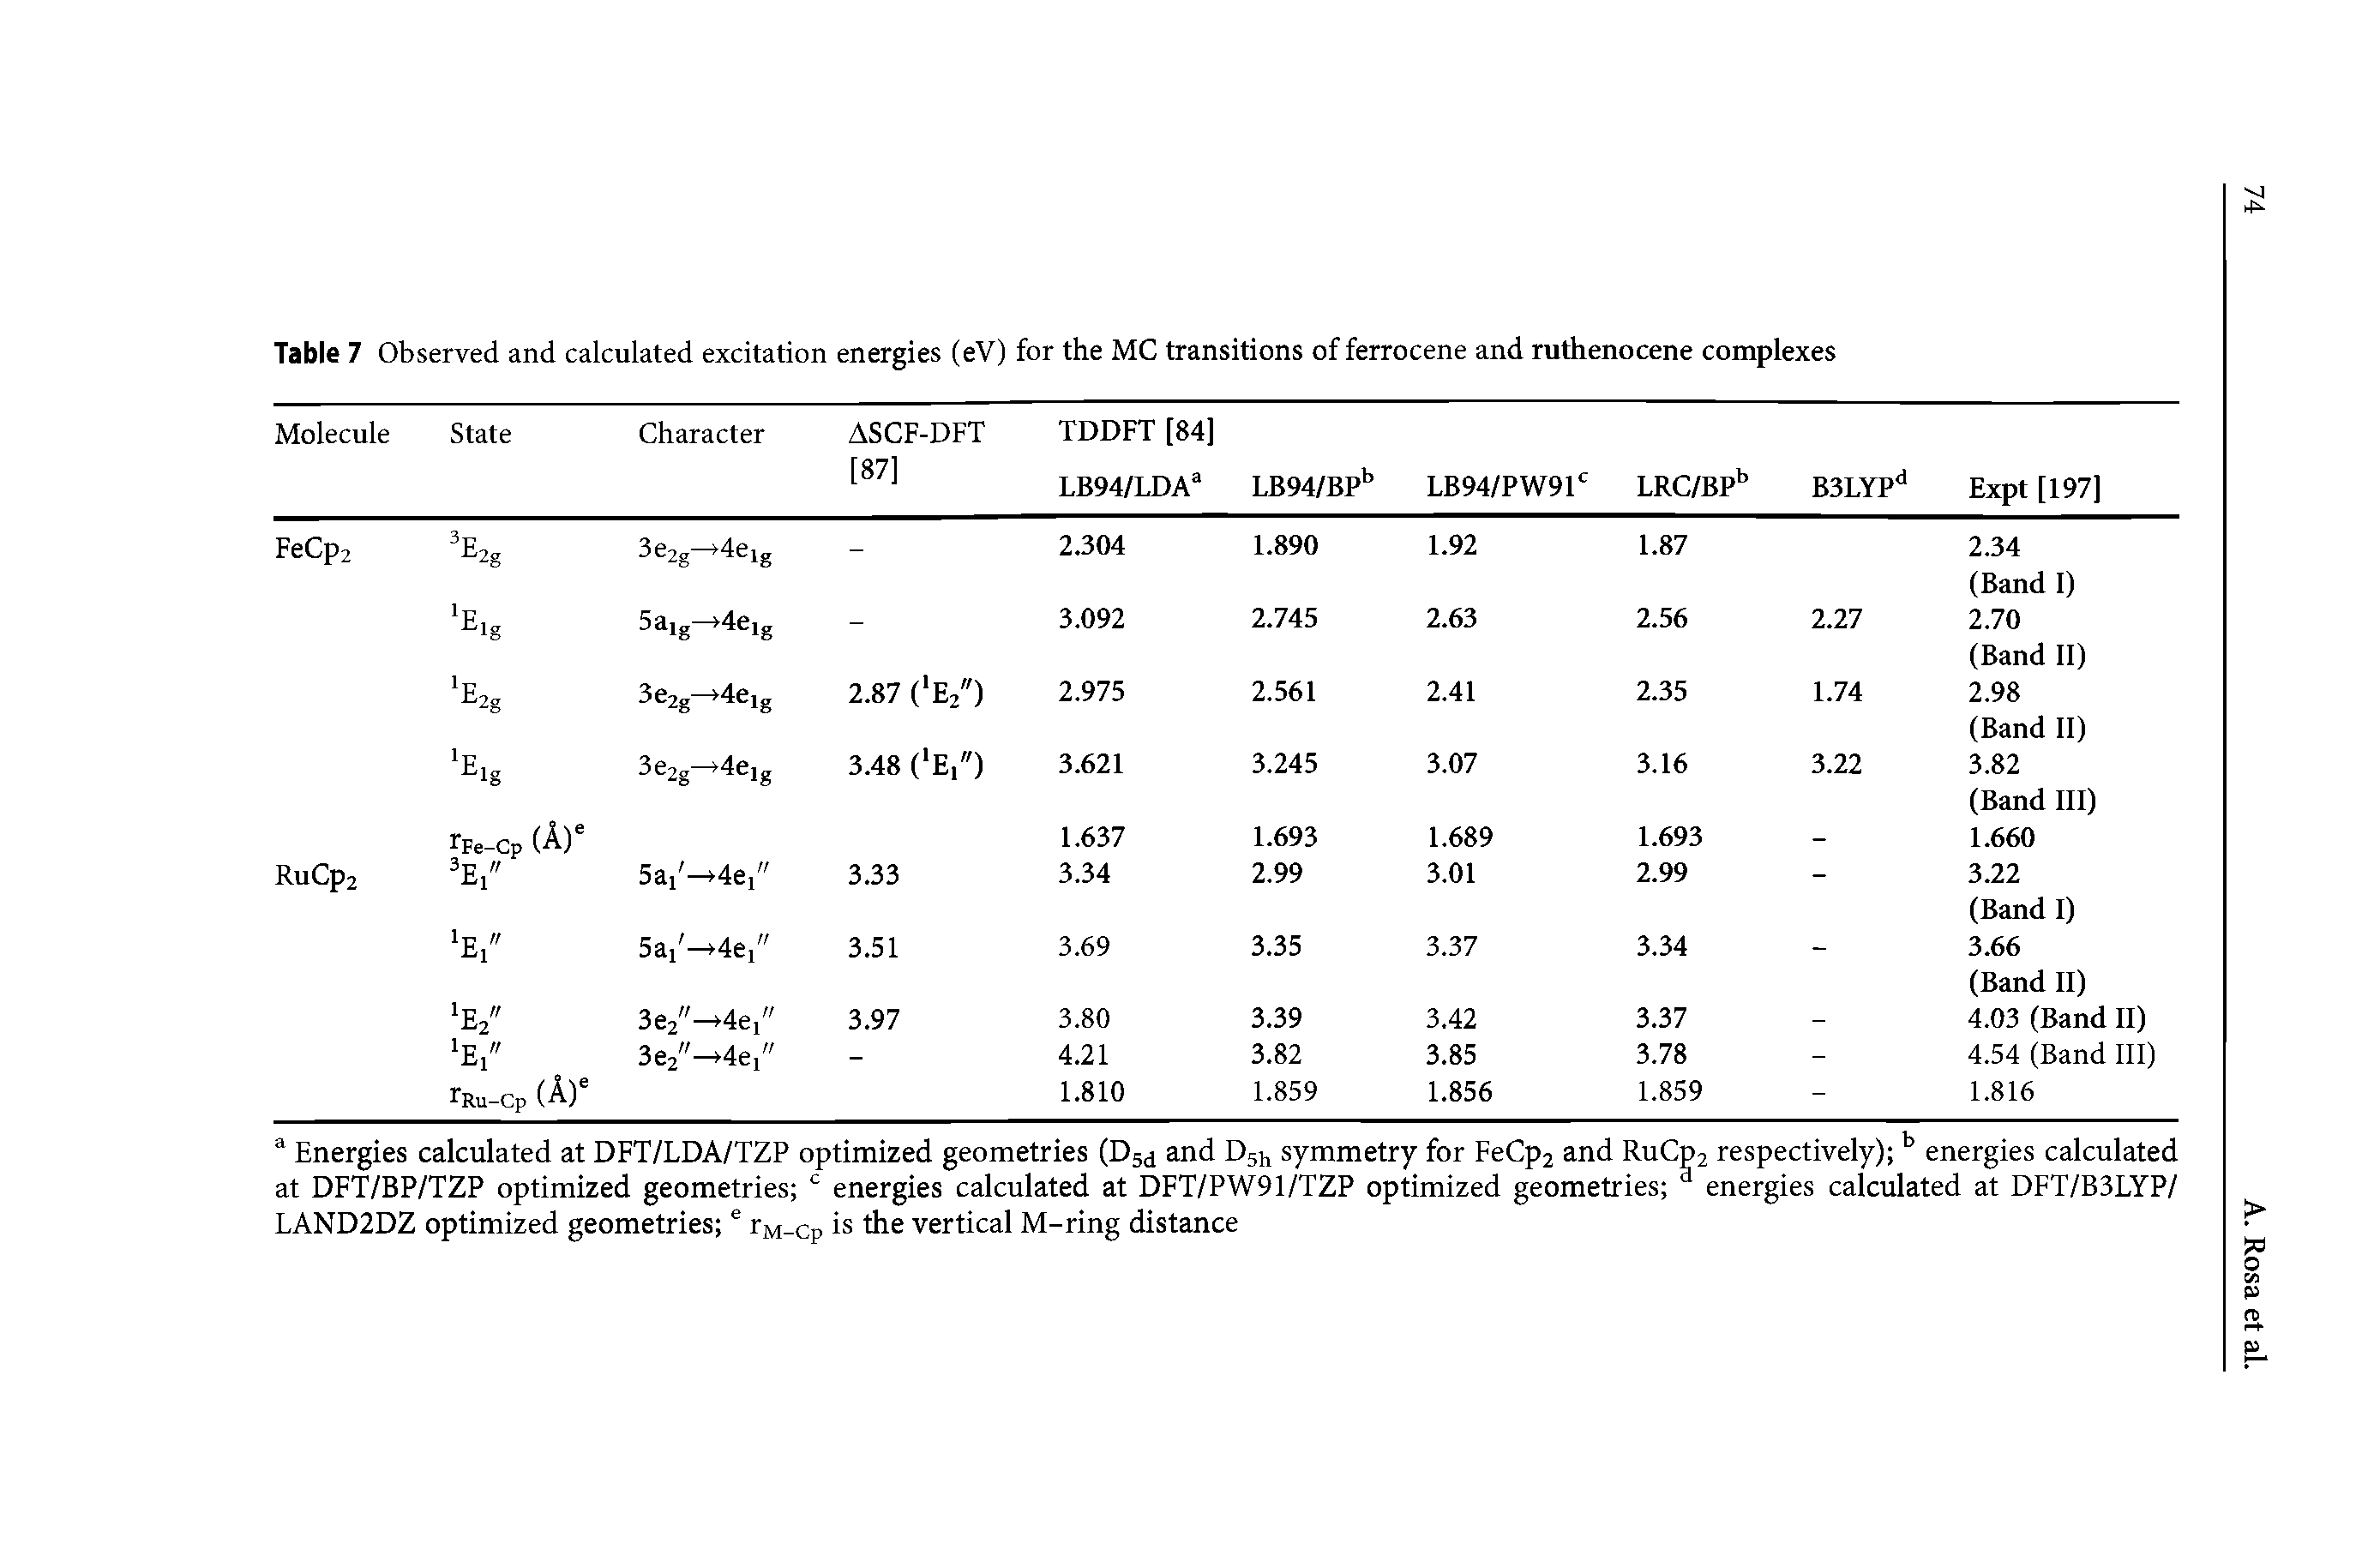 Table 7 Observed and calculated excitation energies (eV) for the MC transitions of ferrocene and ruthenocene complexes...